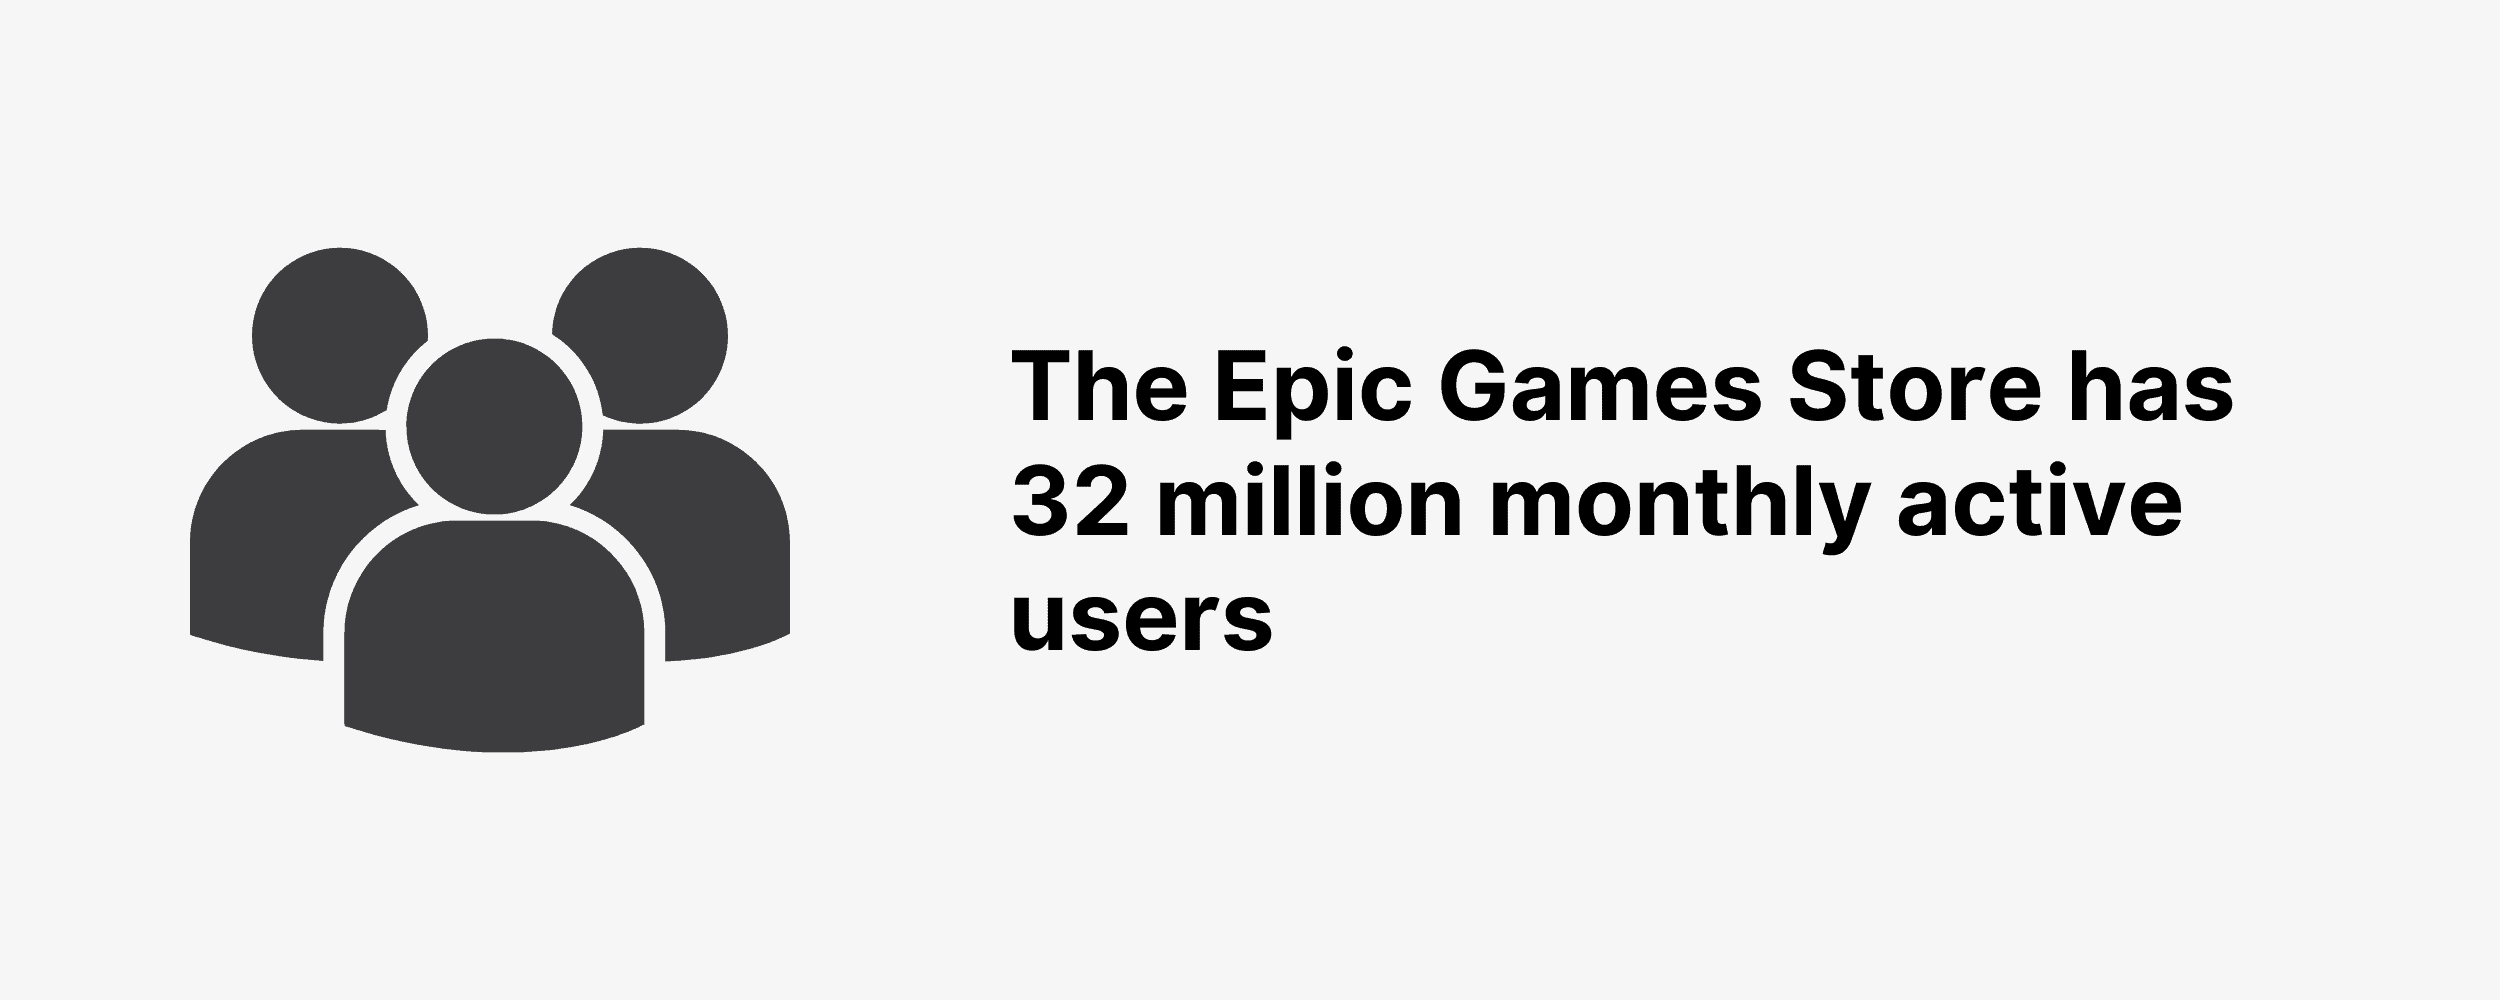 The Epic Games Store has 32 million monthly active users